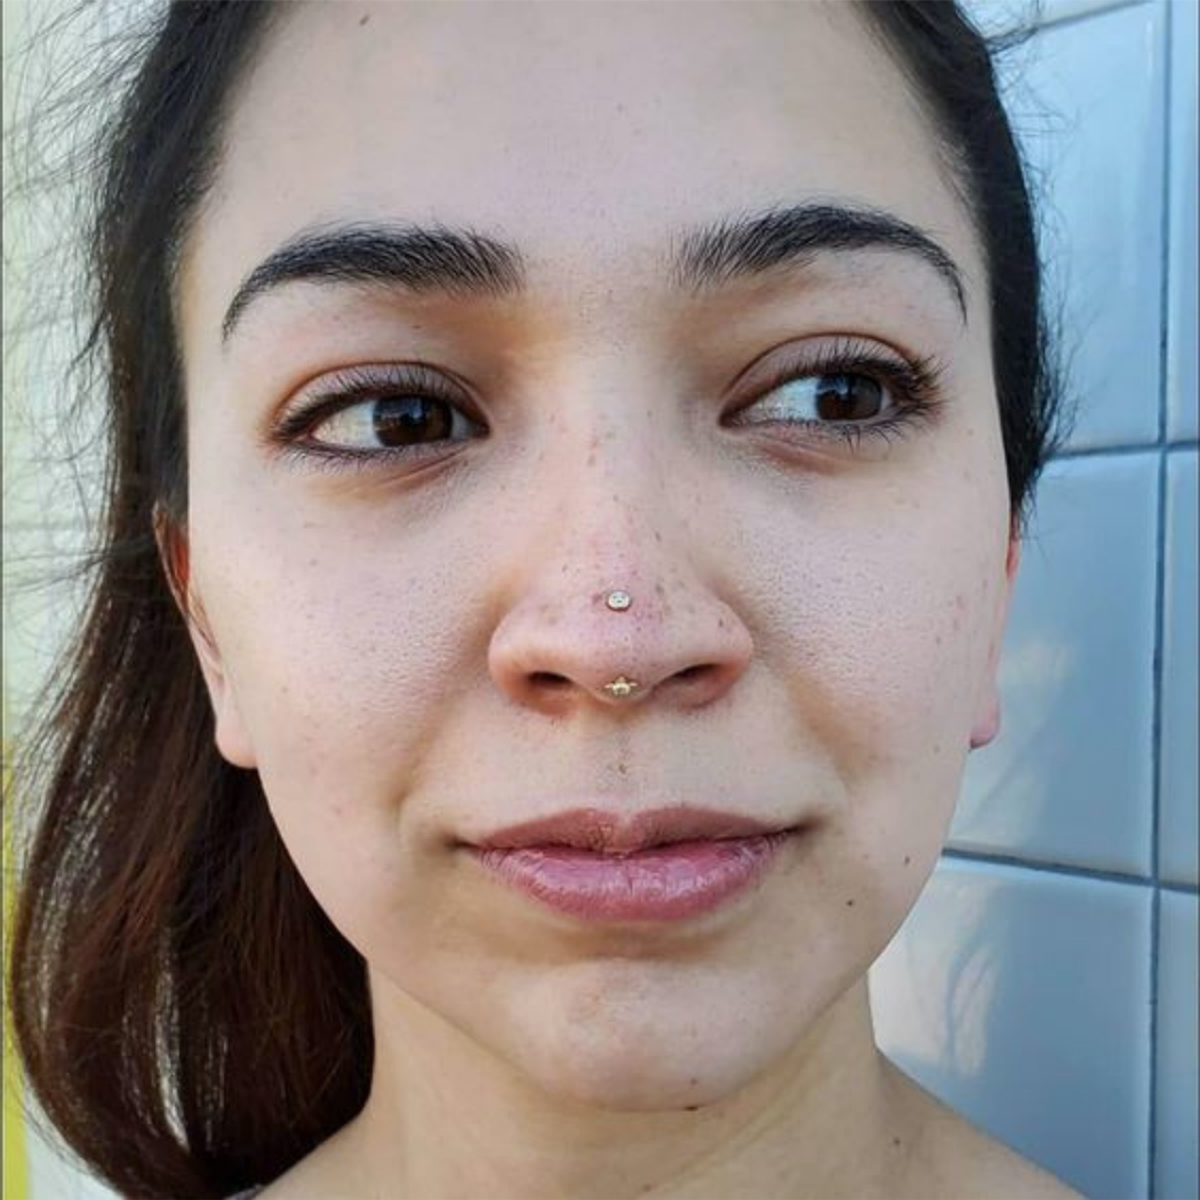 15 woman with rhino piercing on nose